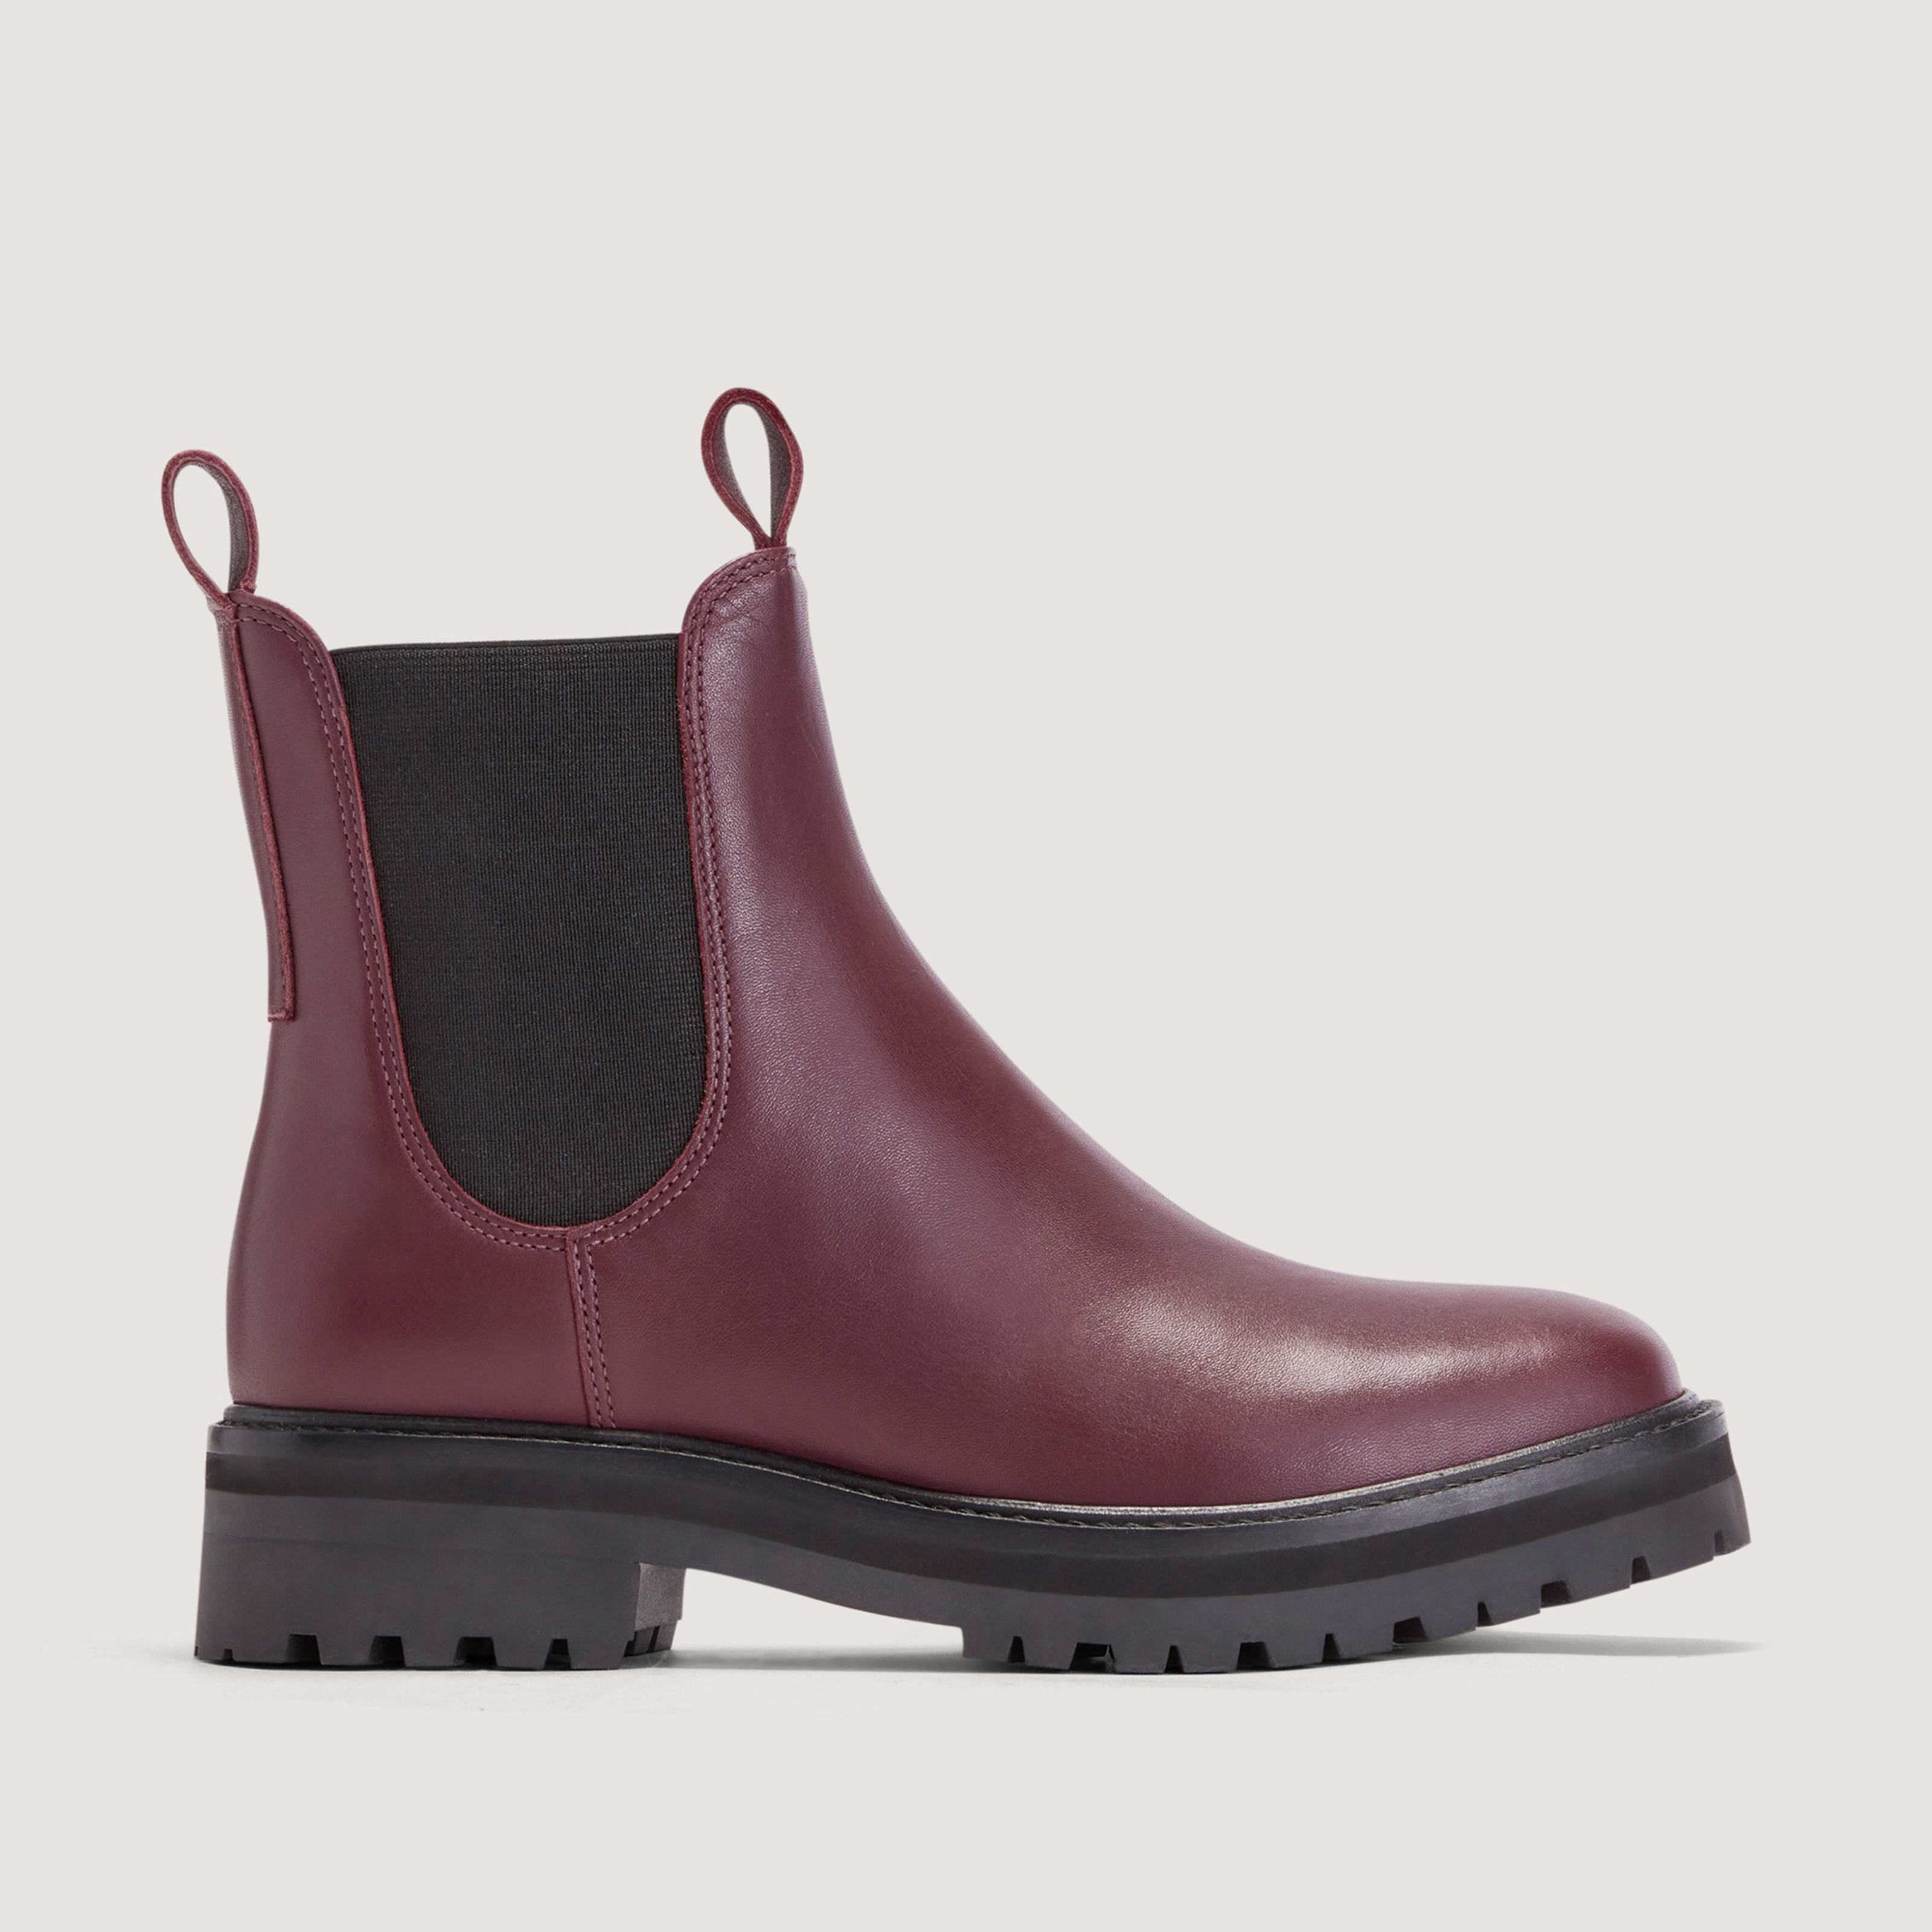 Lug Chelsea Boot by Everlane in Bordeaux, Size 5.5